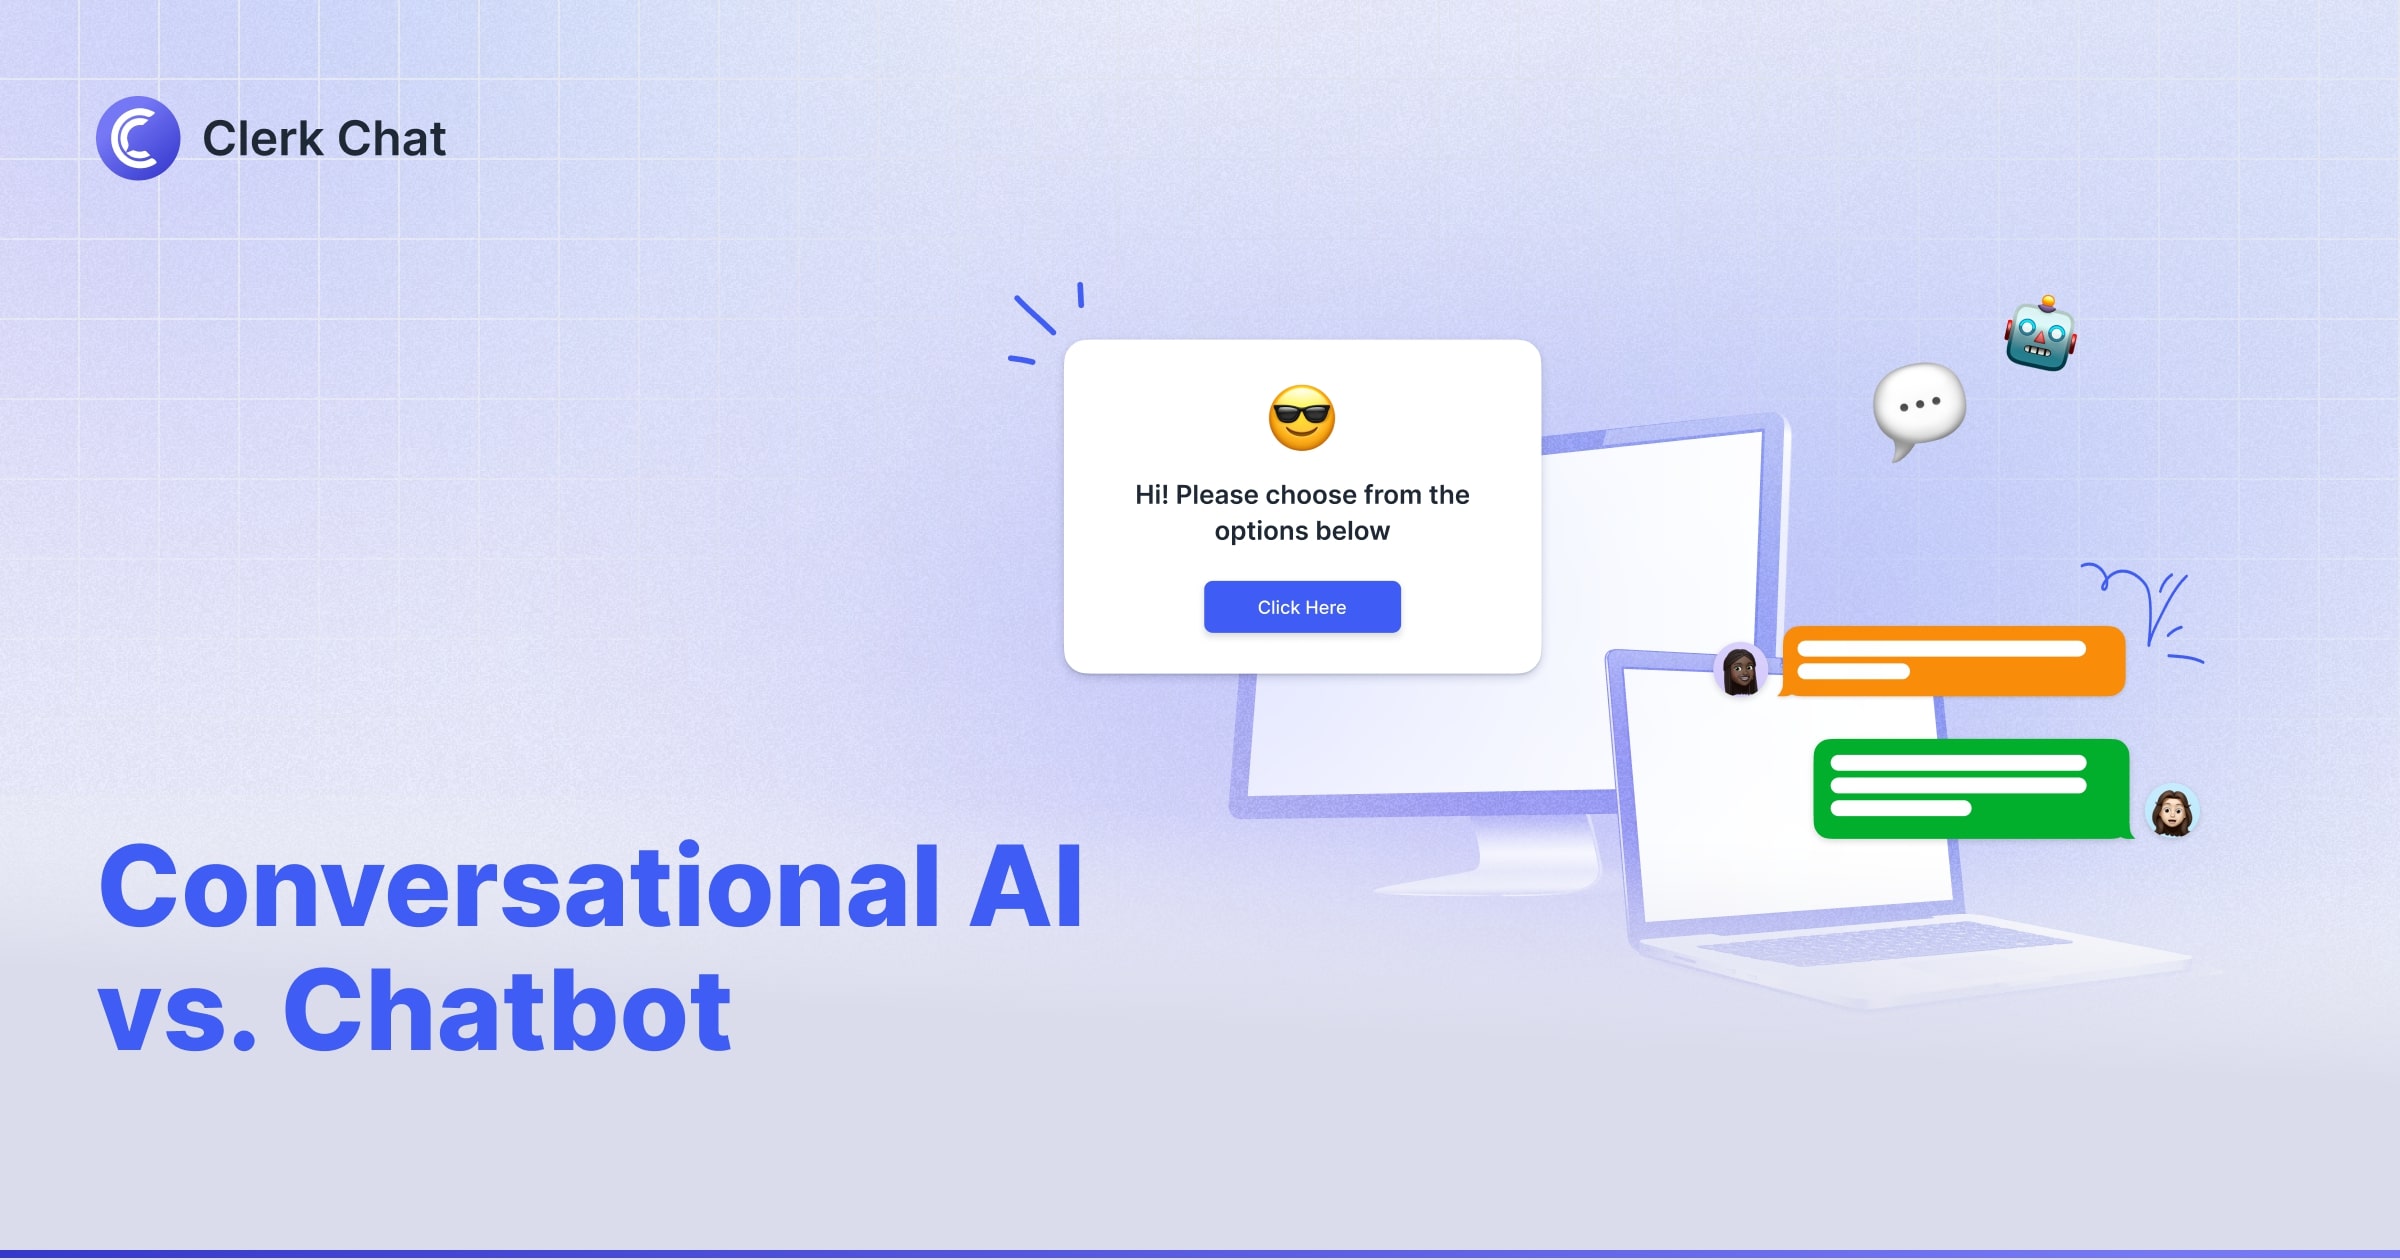 Conversational AI vs Chatbot: What’s the Difference?